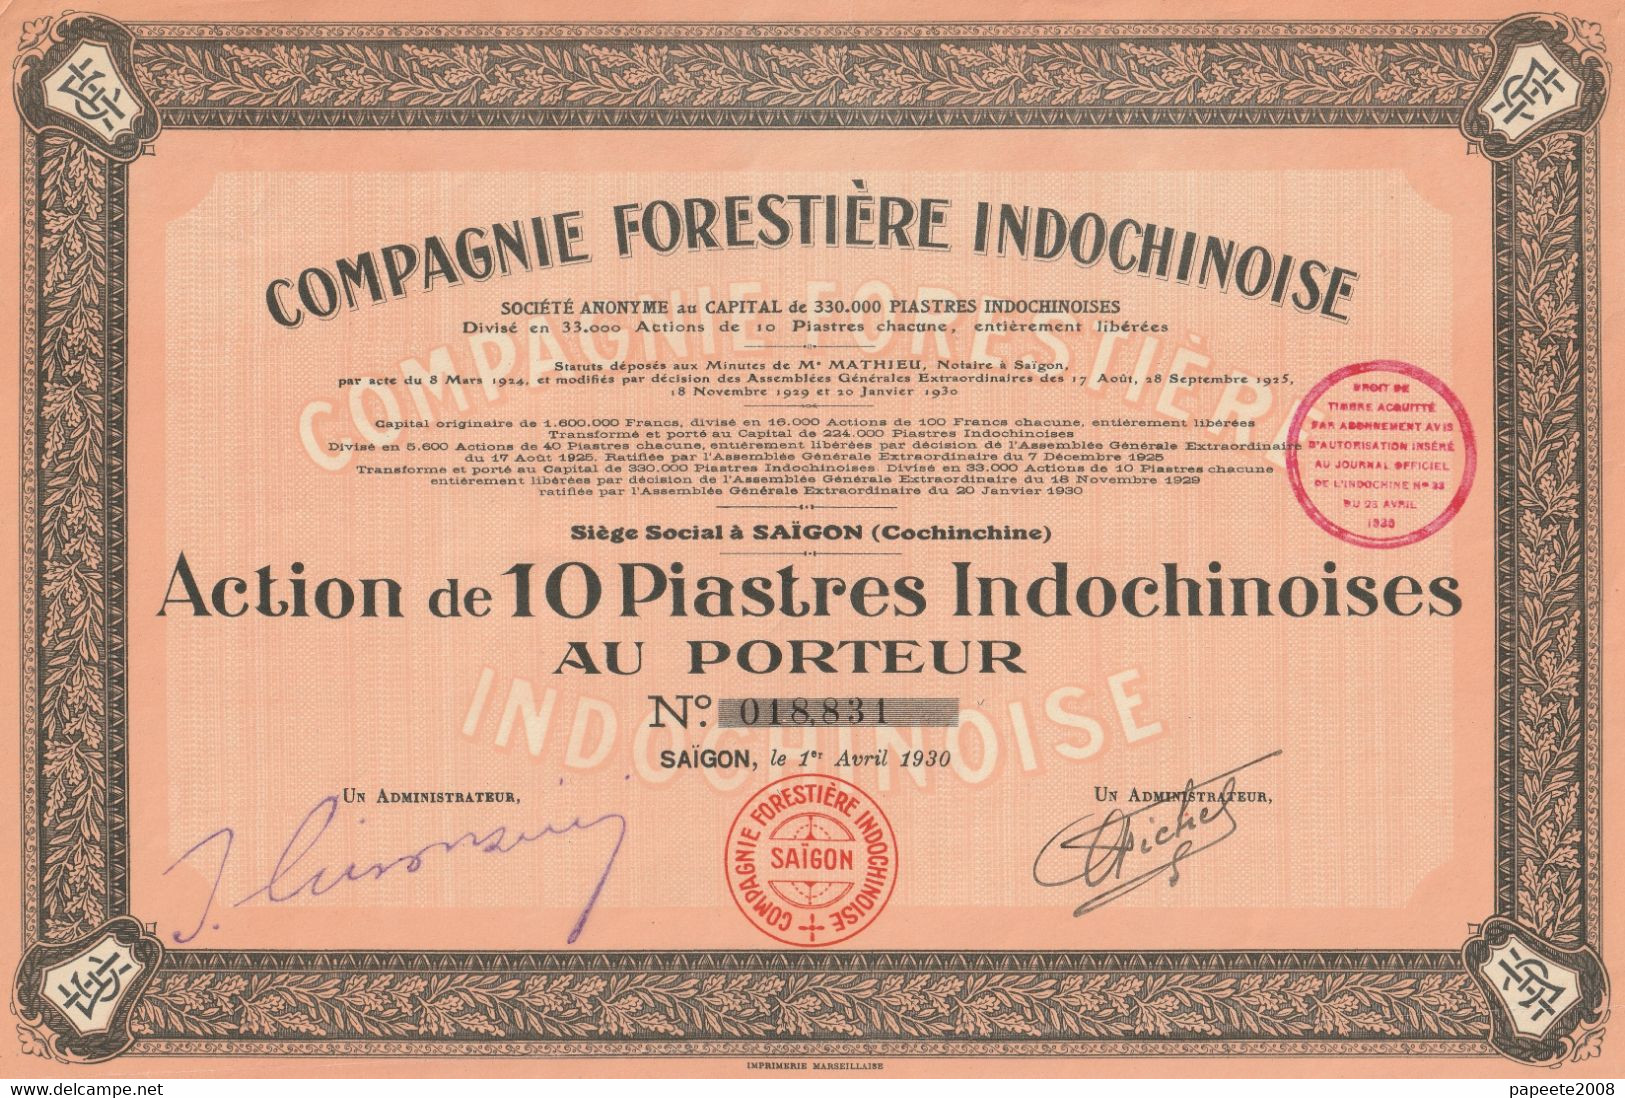 Indochine - Cie Forestière Indochinoise - A 10 Piastres Indochinoises - Asia